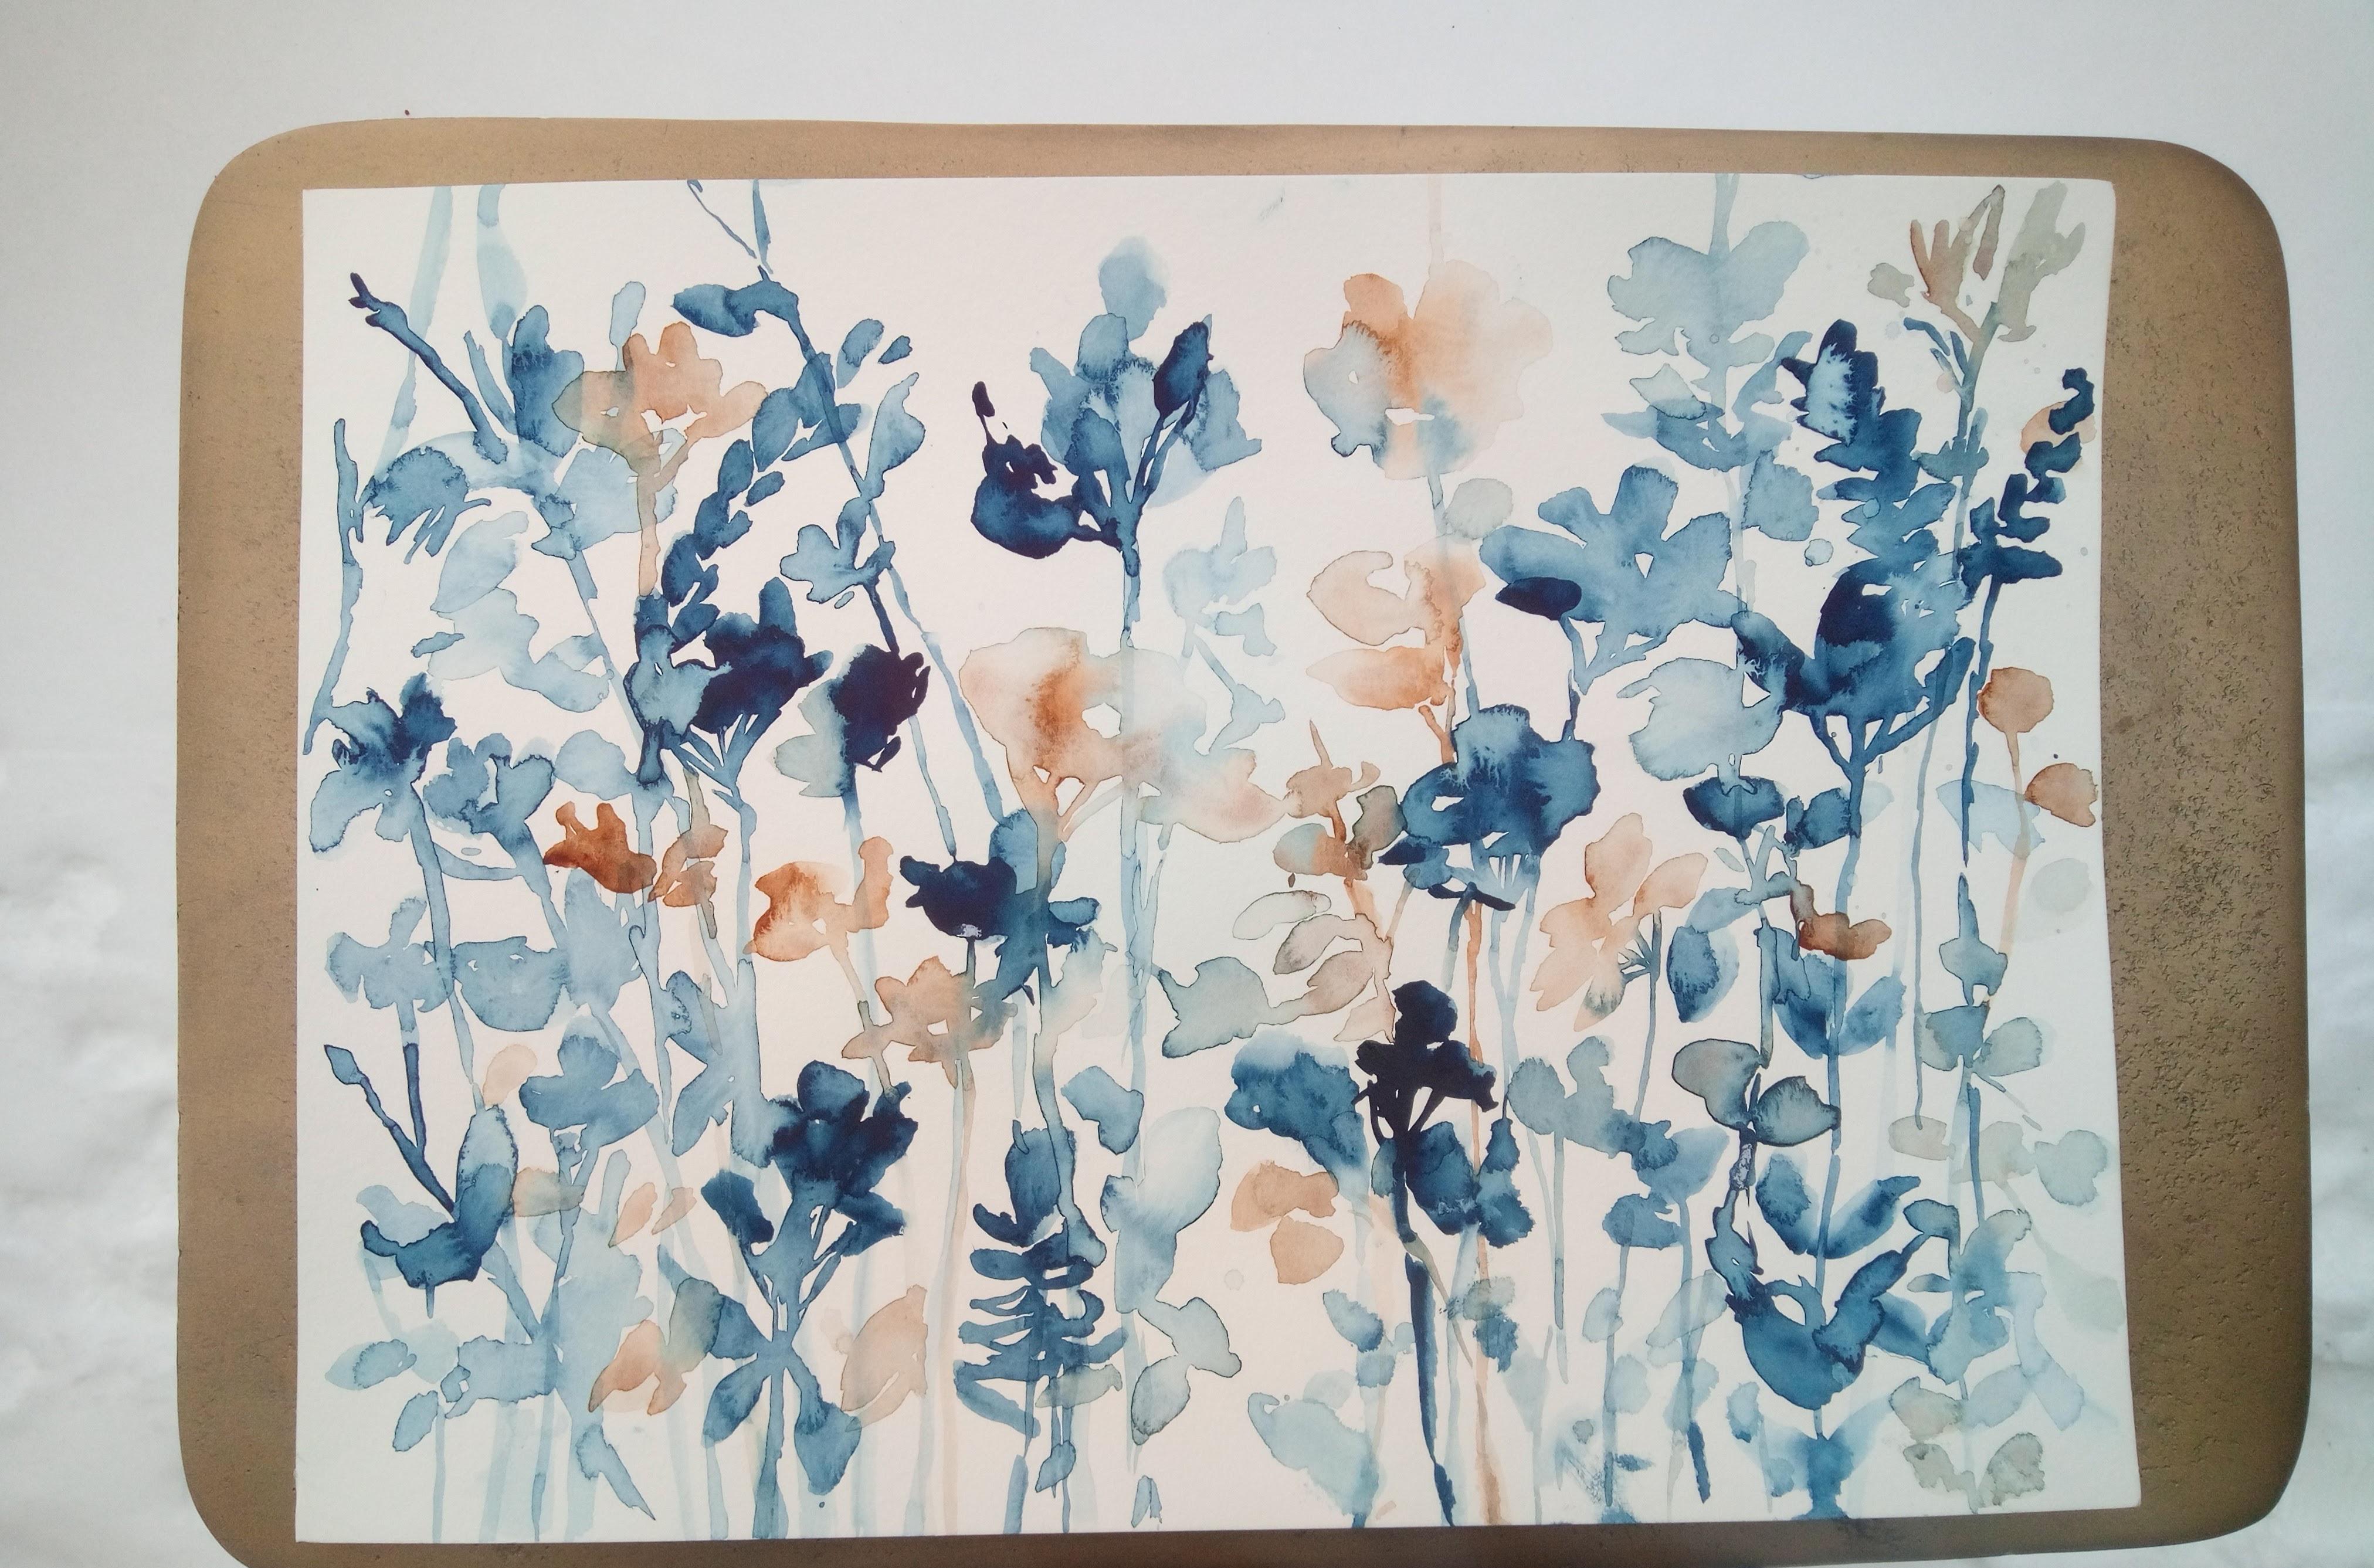 <p>Artist Comments<br>The colors of winter gleam in artist Karin Johannesson's ethereal display of flowers. She depicts an interpretation of a winter field in Ontario, Canada. Flourishing foliage emerges from the snow in full bloom. The composition